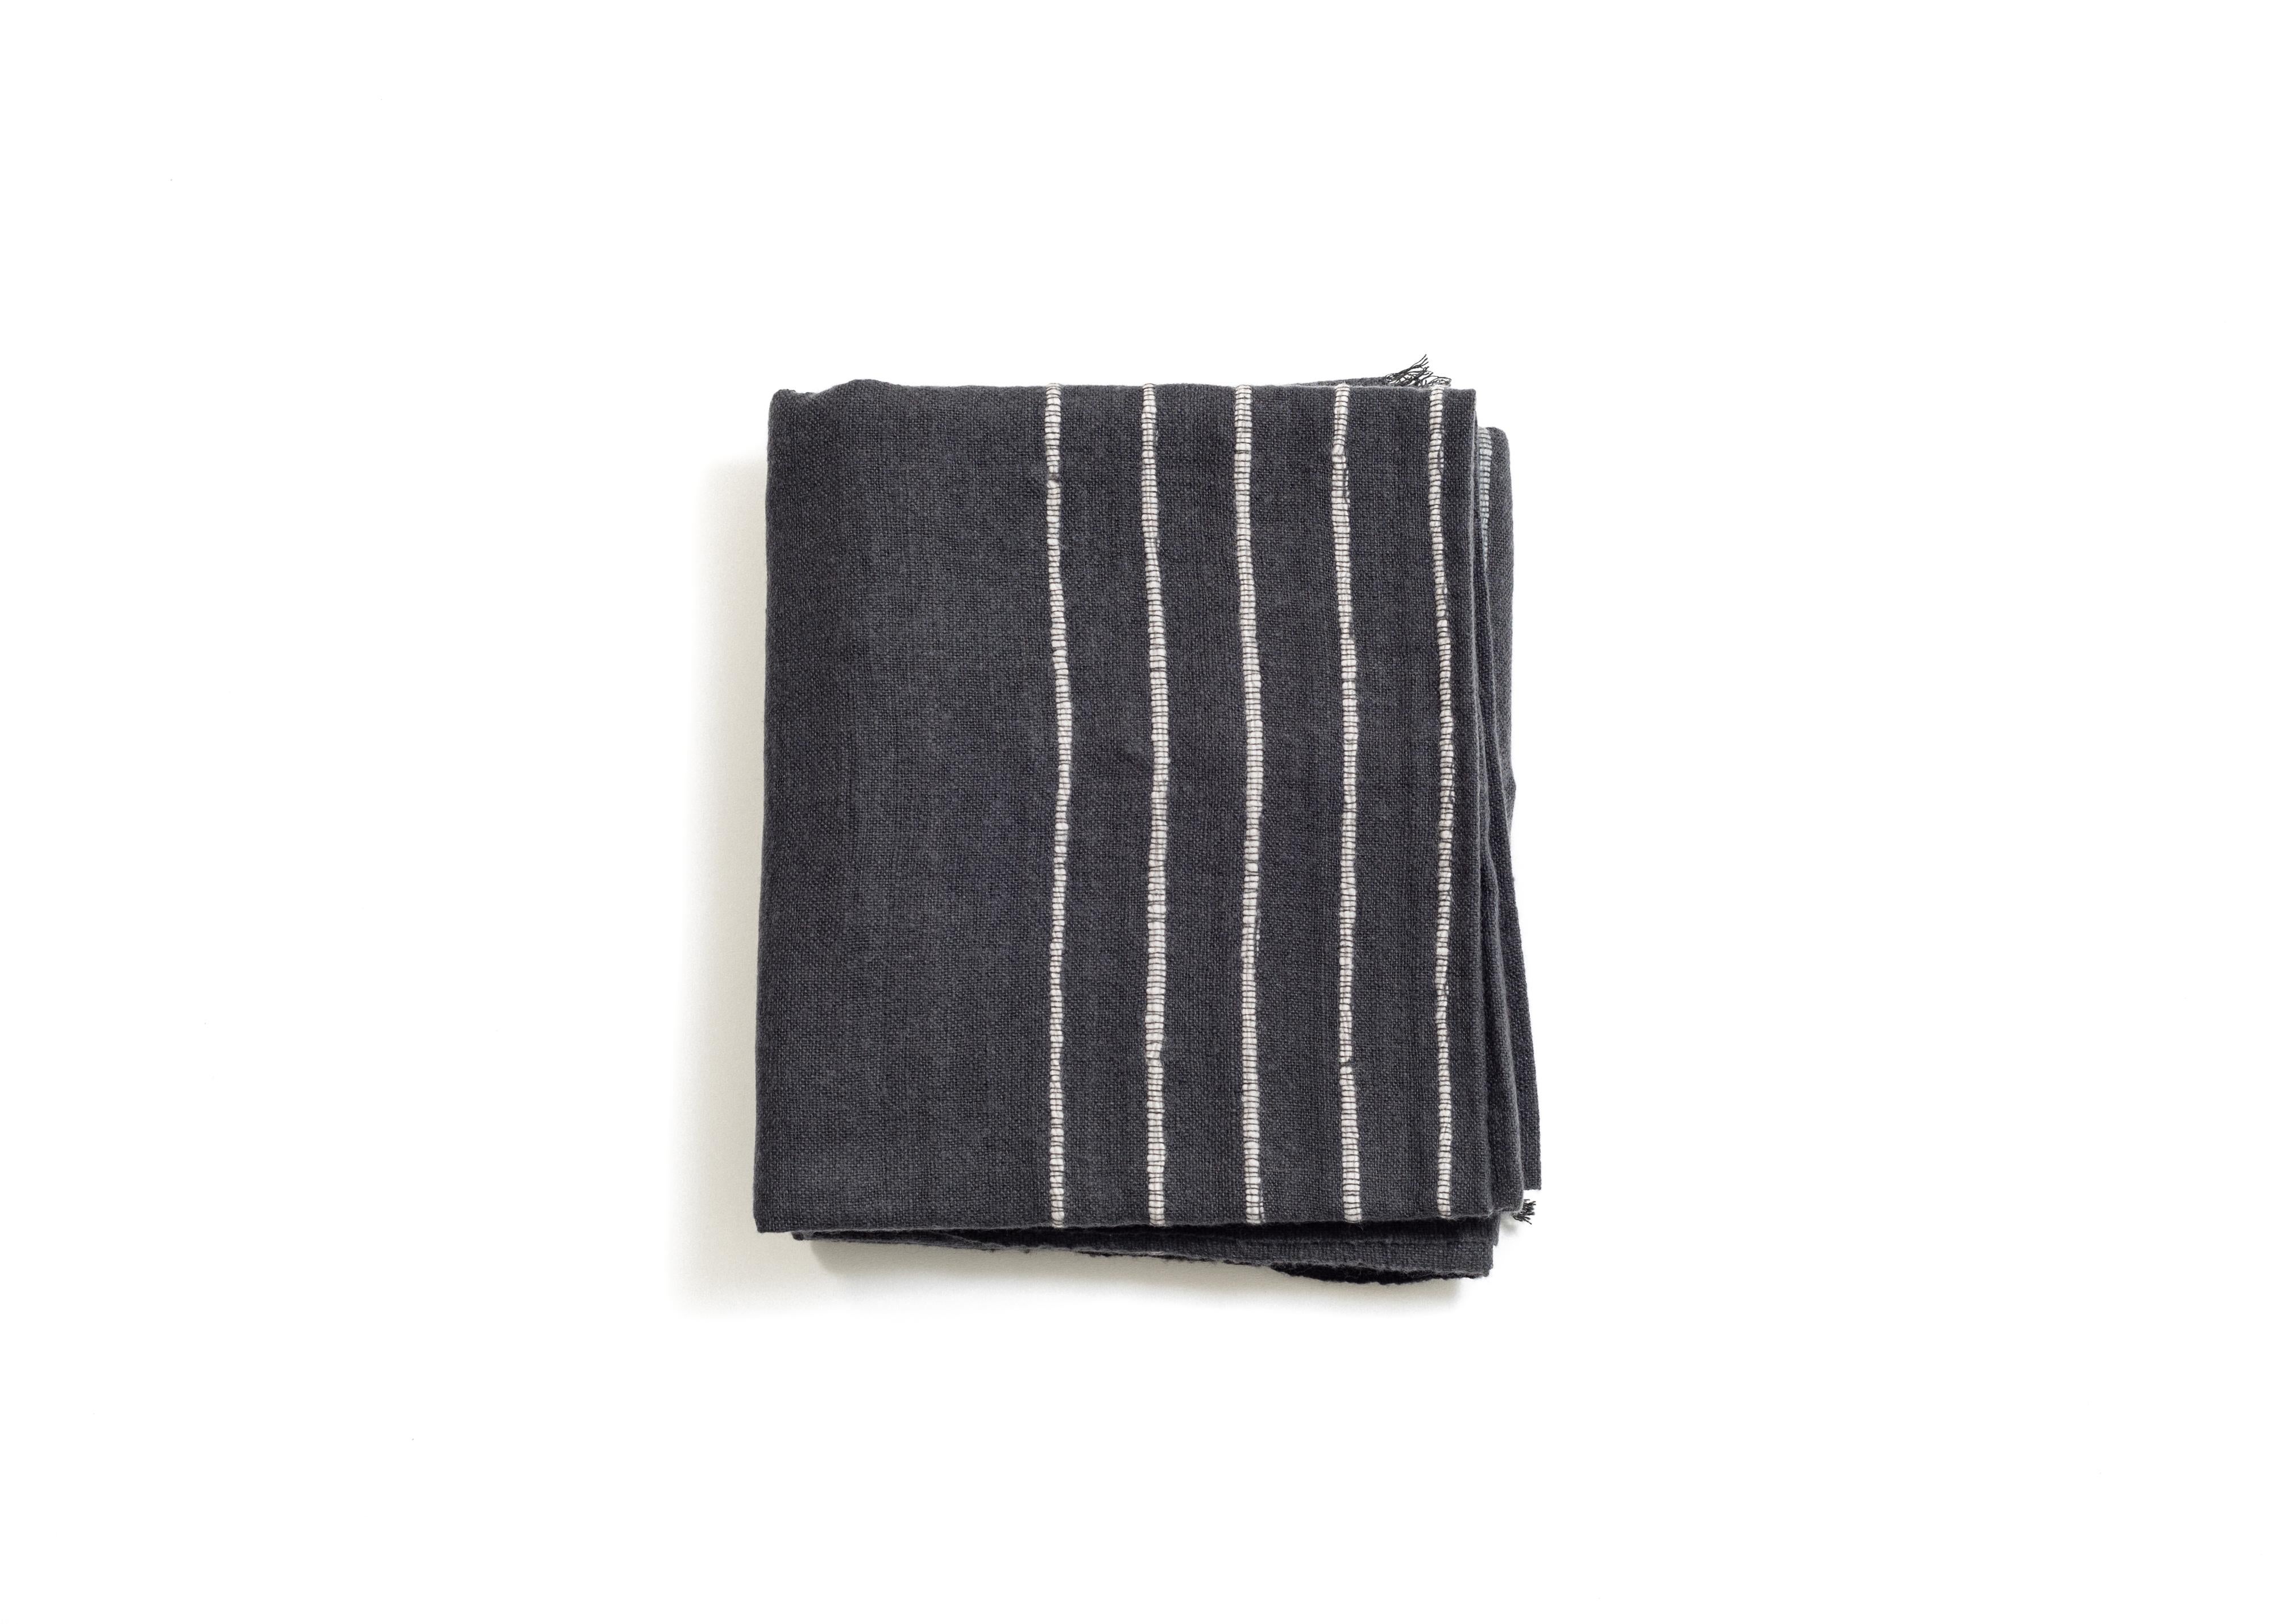 Hand-Woven  Alei Handloom Throw / Blanket In Charcoal Black , Stripes Pattern  For Sale